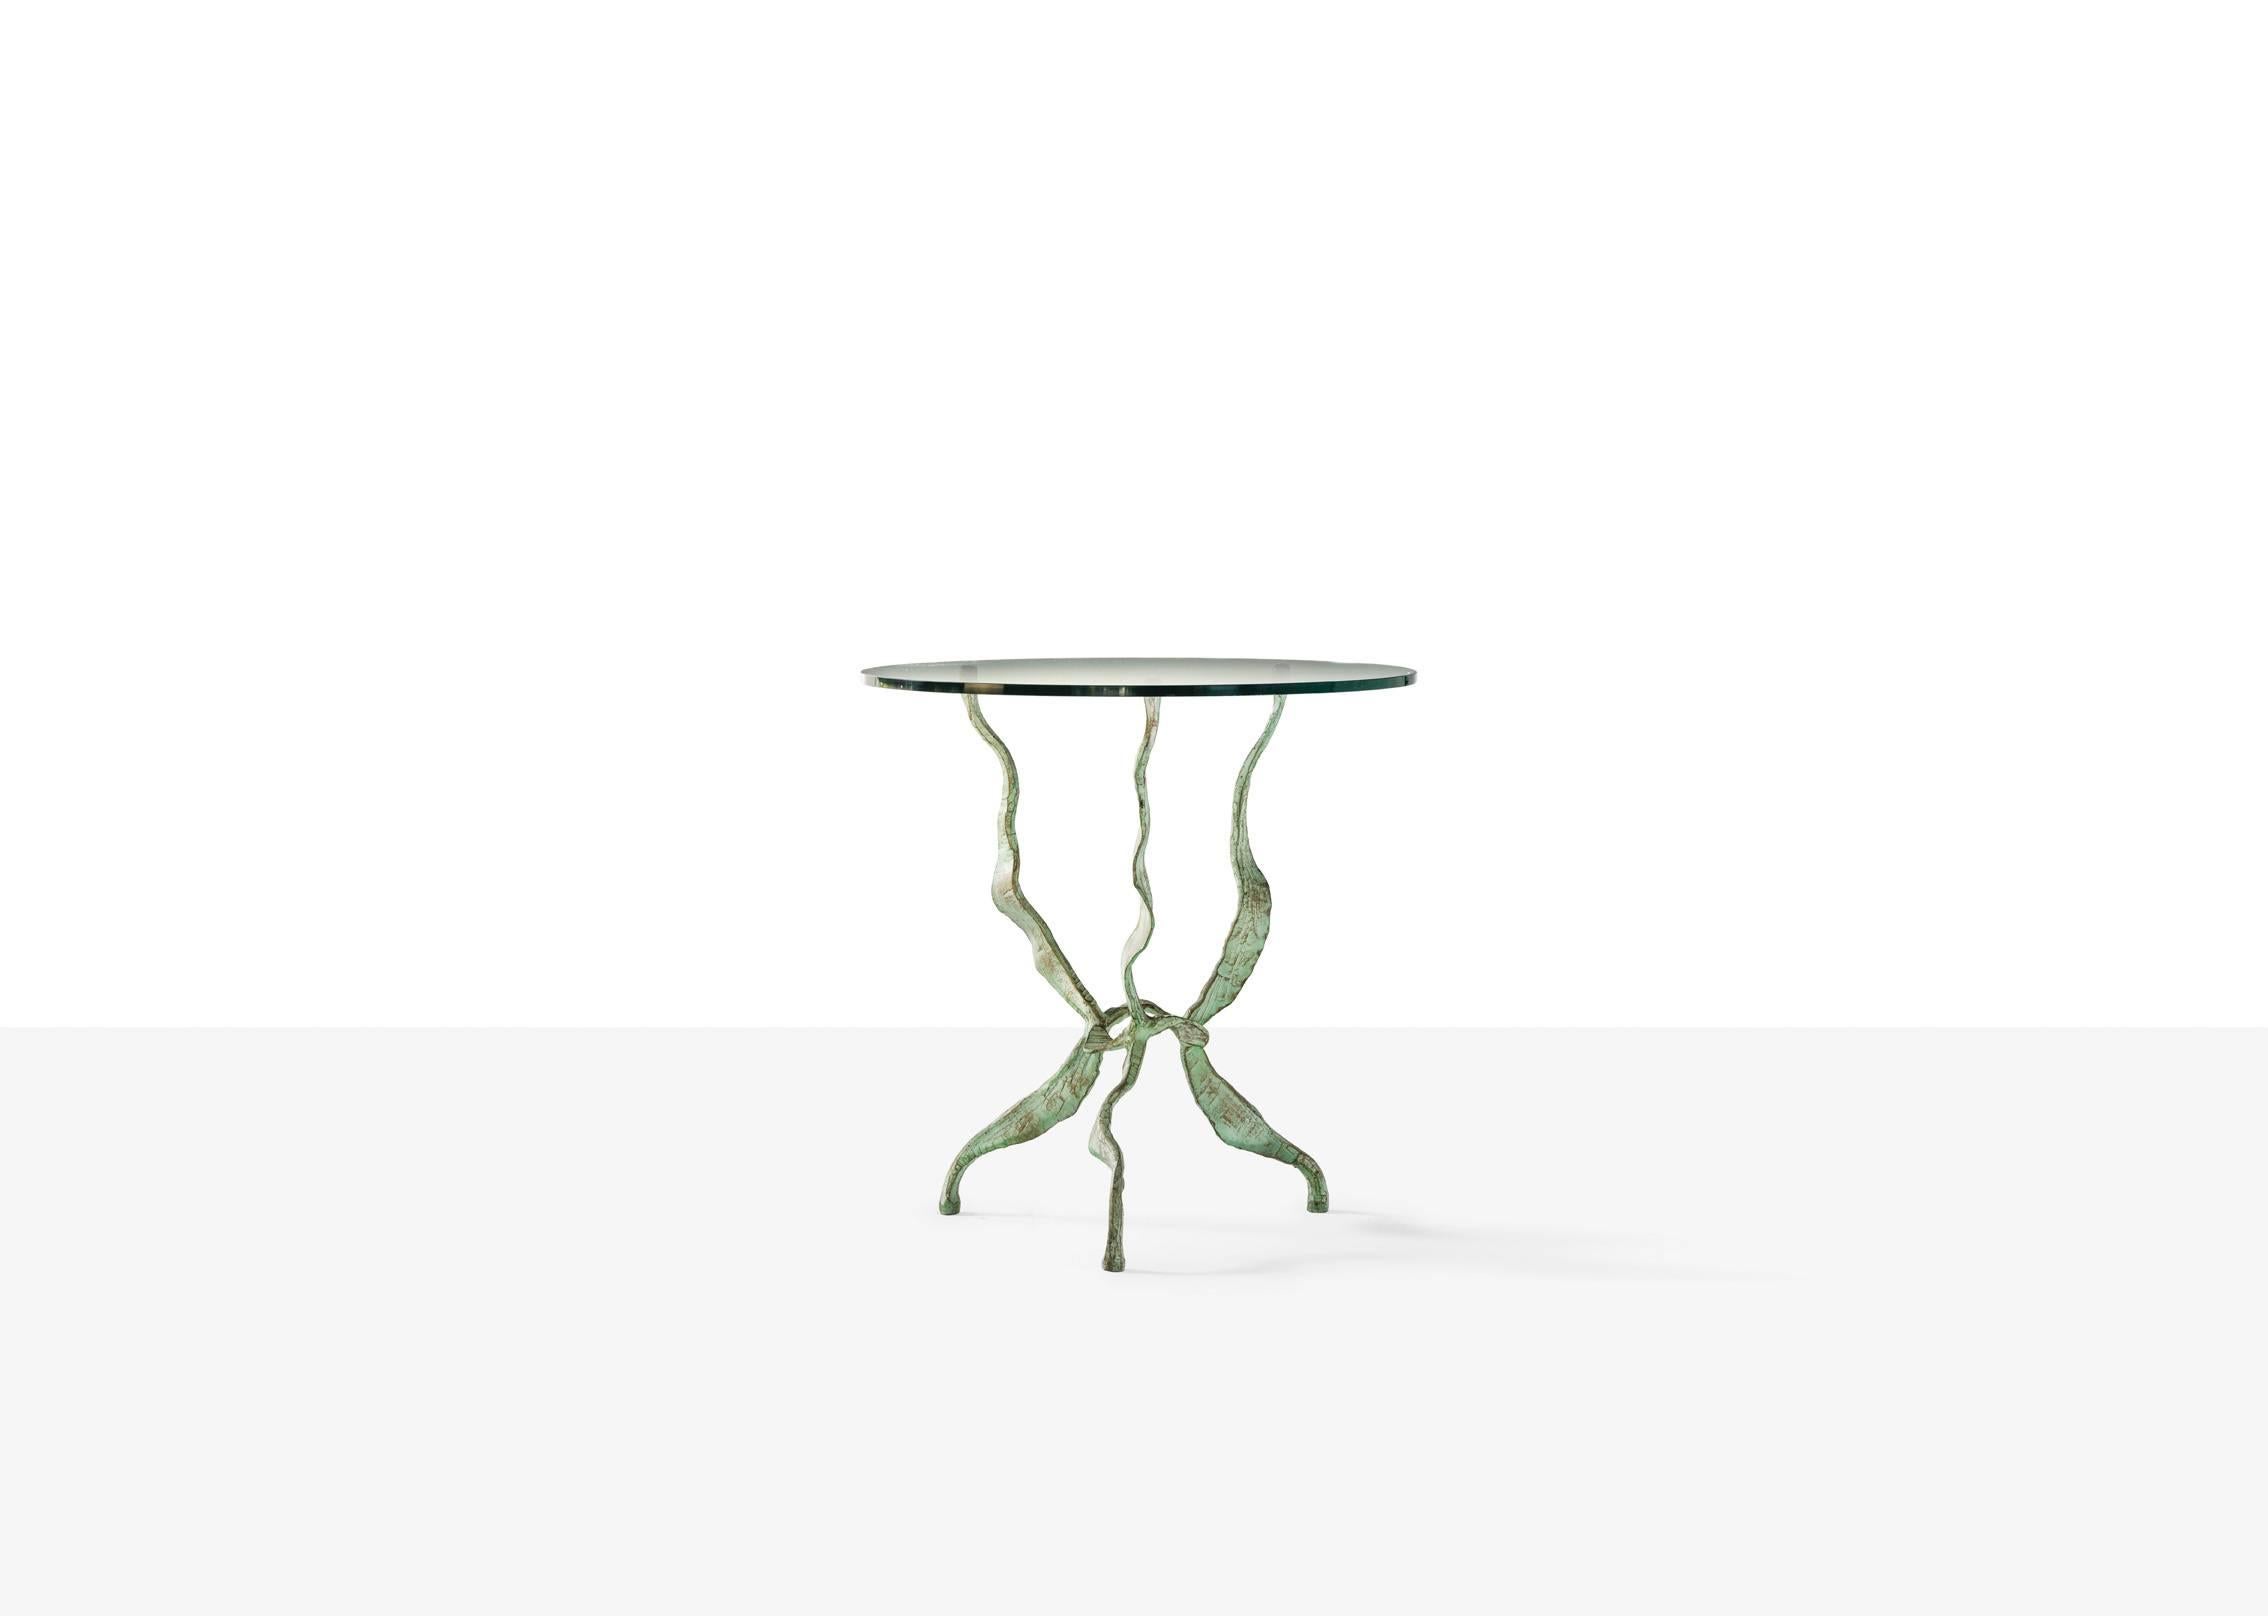 'Alghe' side table by Salvino Marsura
The base is made from hand-forged and hammered steel and is finished with powder colored pigments.
Measure: Glass top is 60cm diameter, custom size of glass on request.
Made in Treviso, Italy.